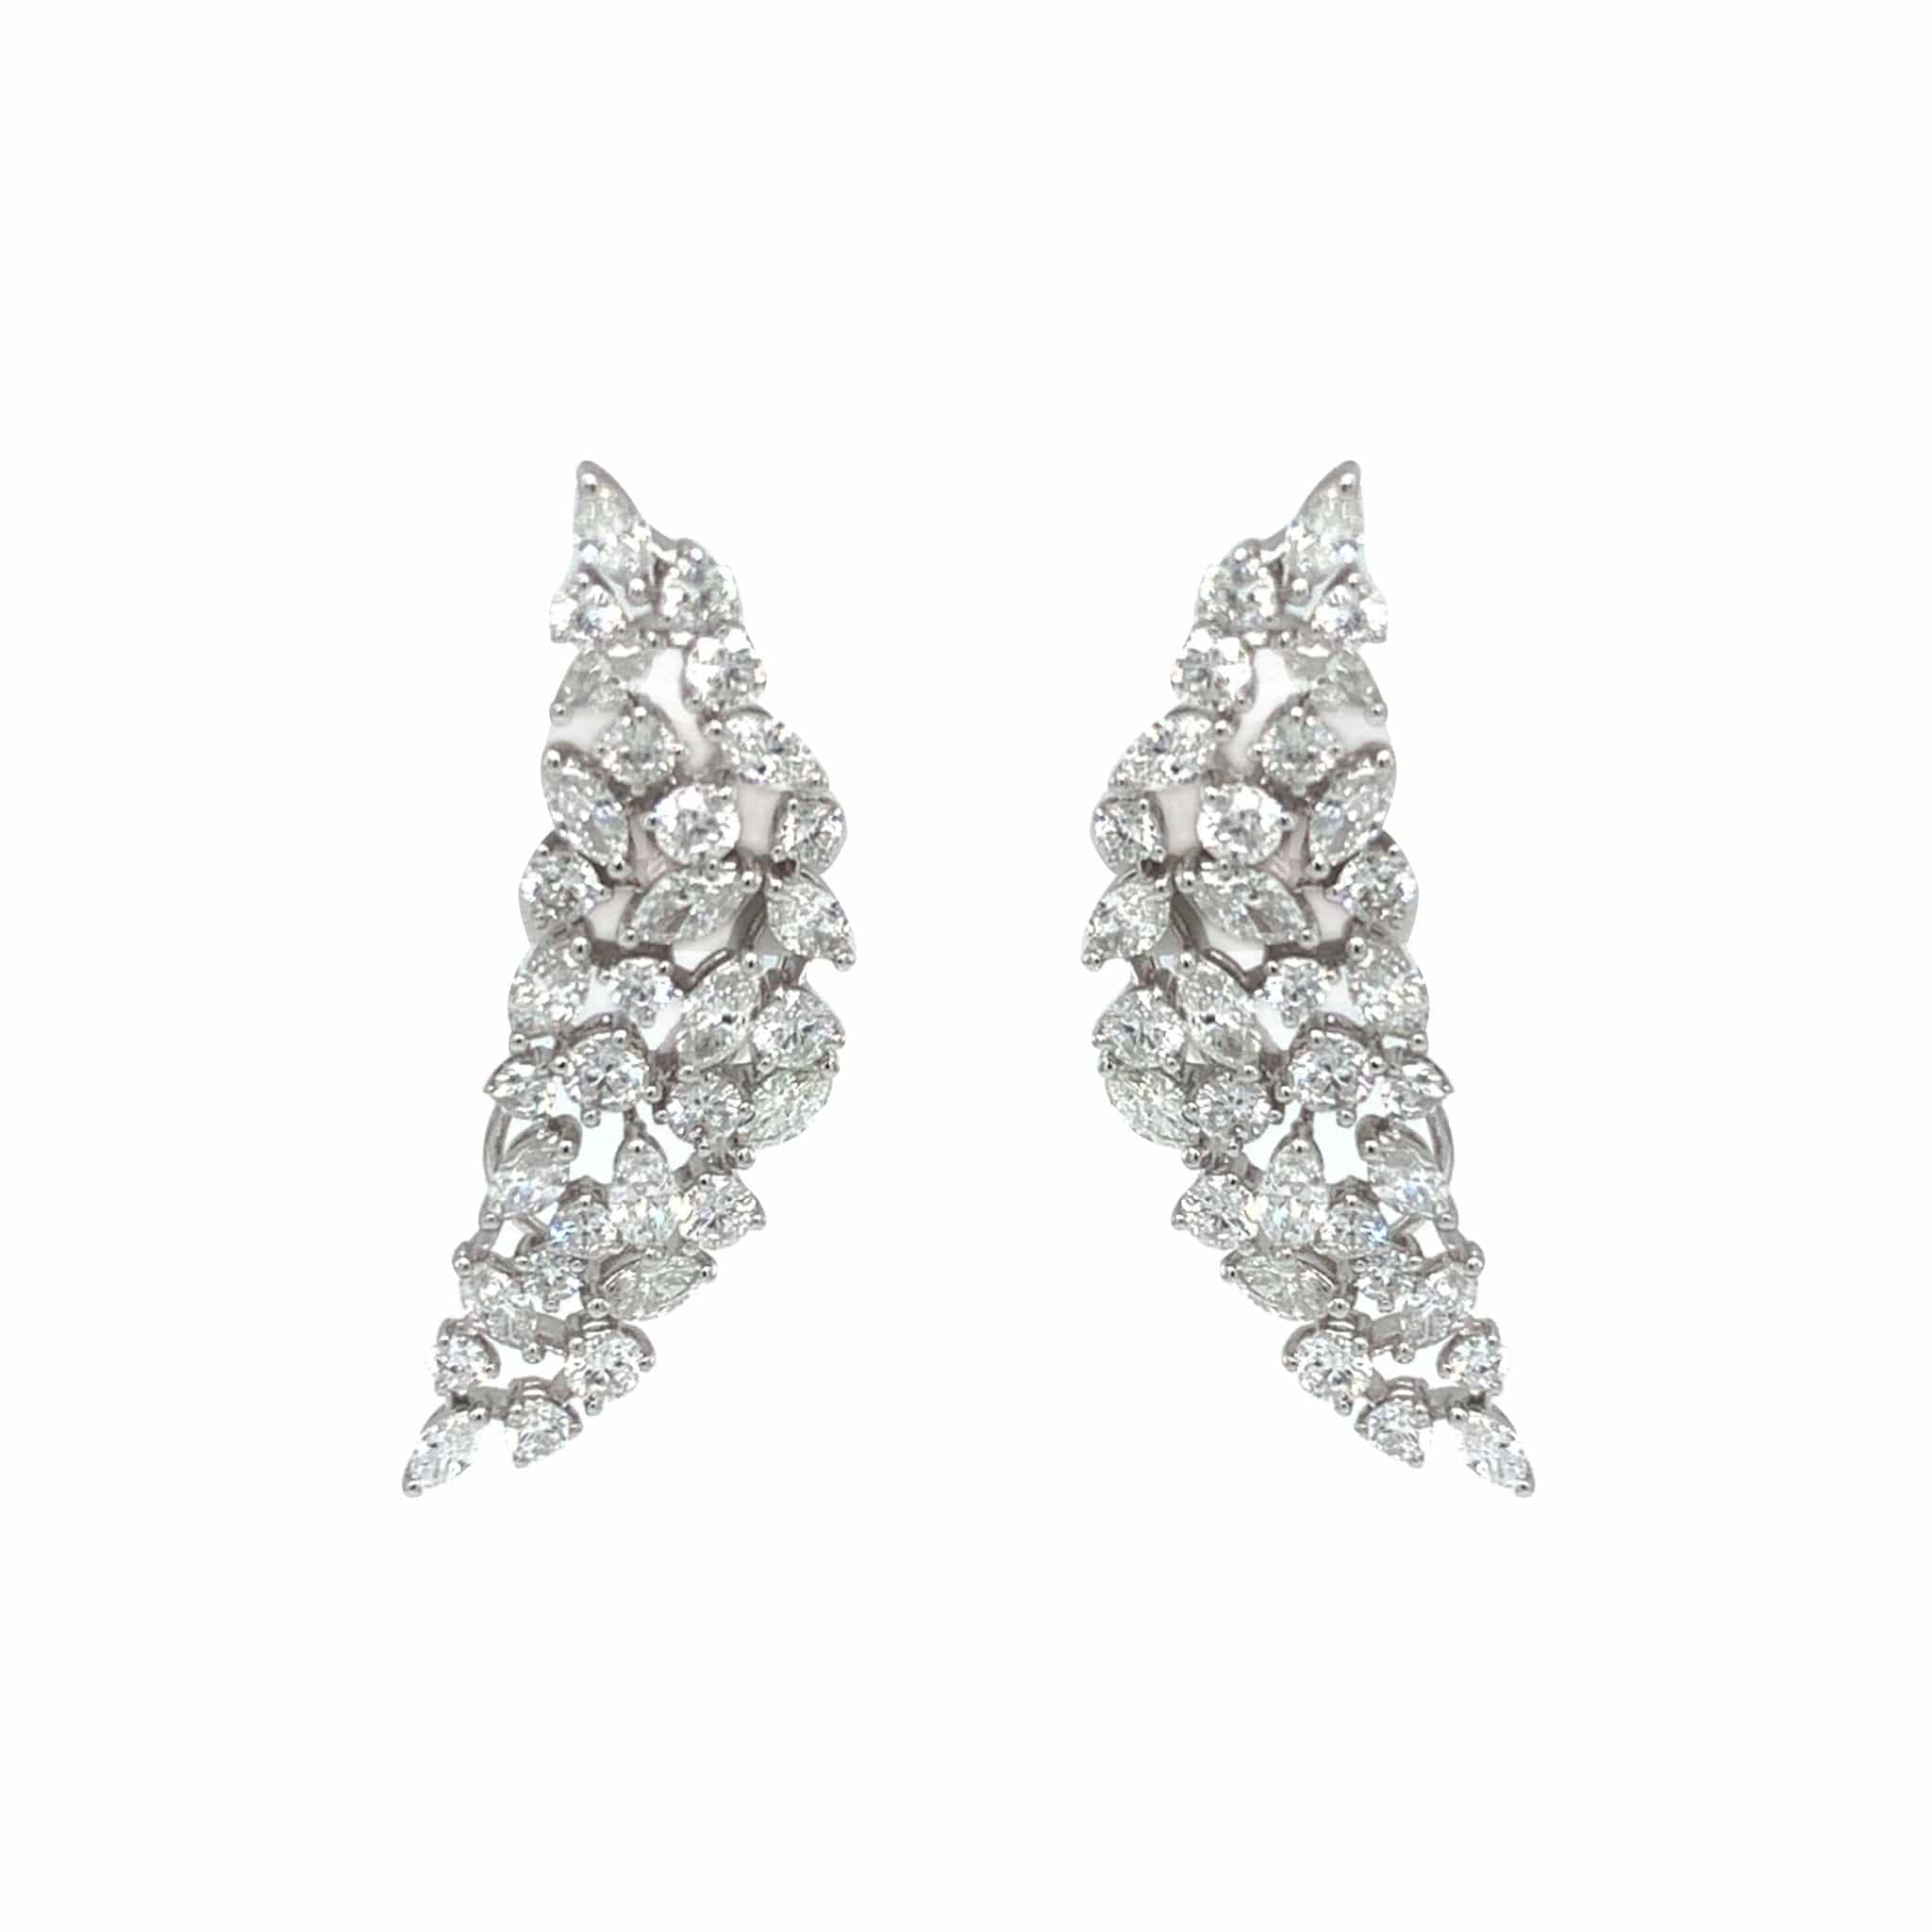 M.Fitaihi Everyday Sparkle - White Gold with Diamonds Earrings - M.Fitaihi